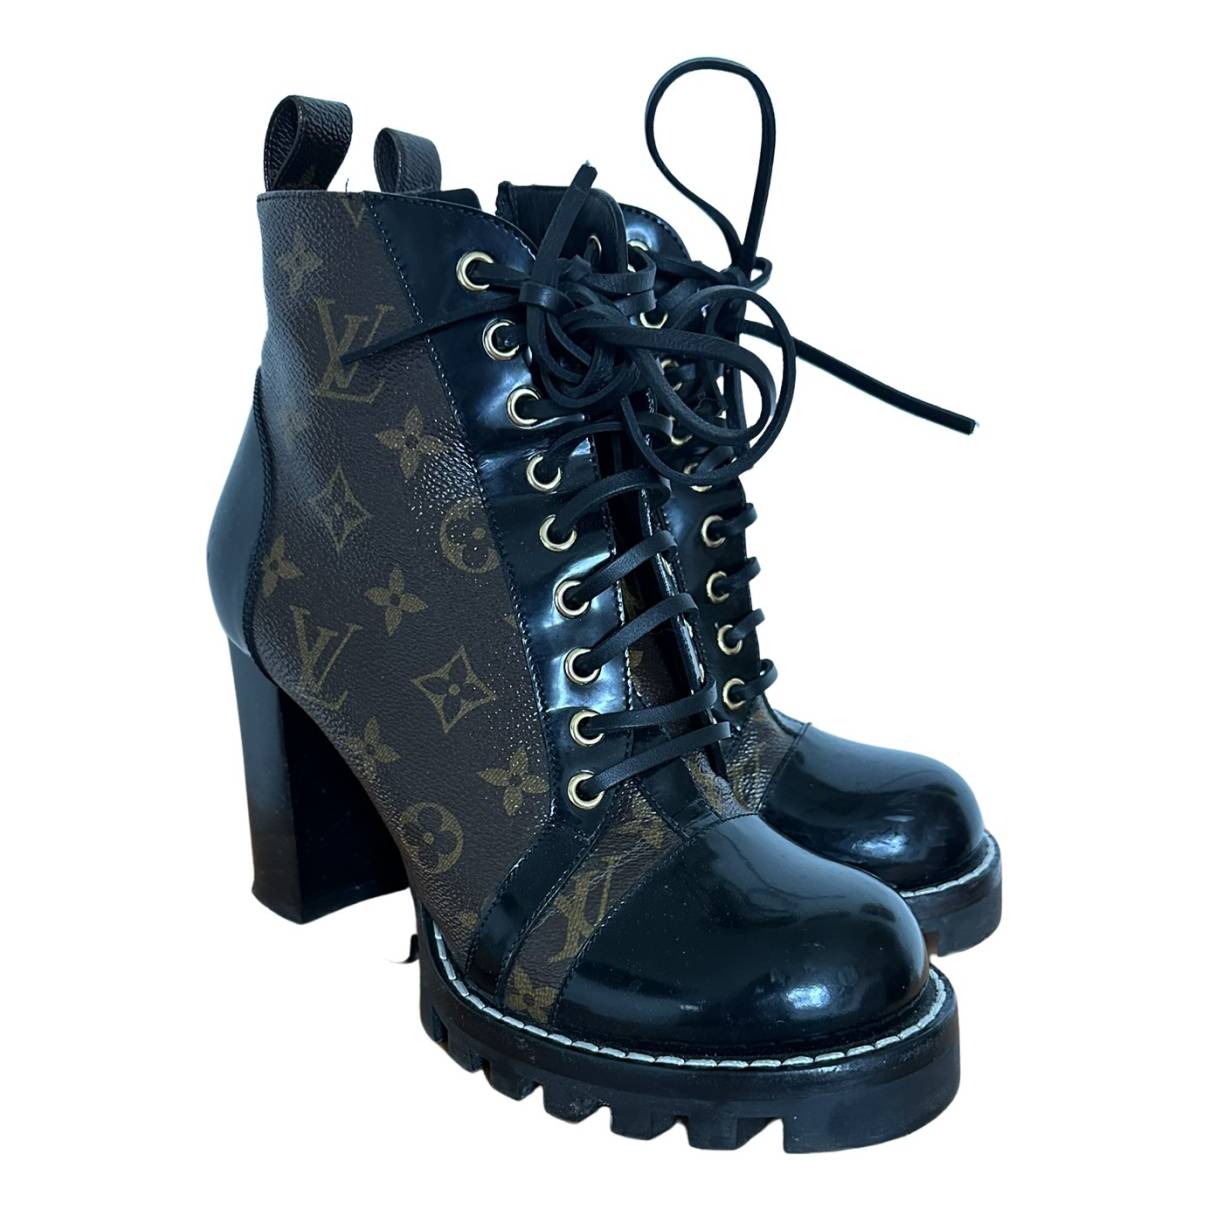 Proportional tælle Ithaca Leather biker boots Louis Vuitton Black size 39.5 EU in Leather - 32722187